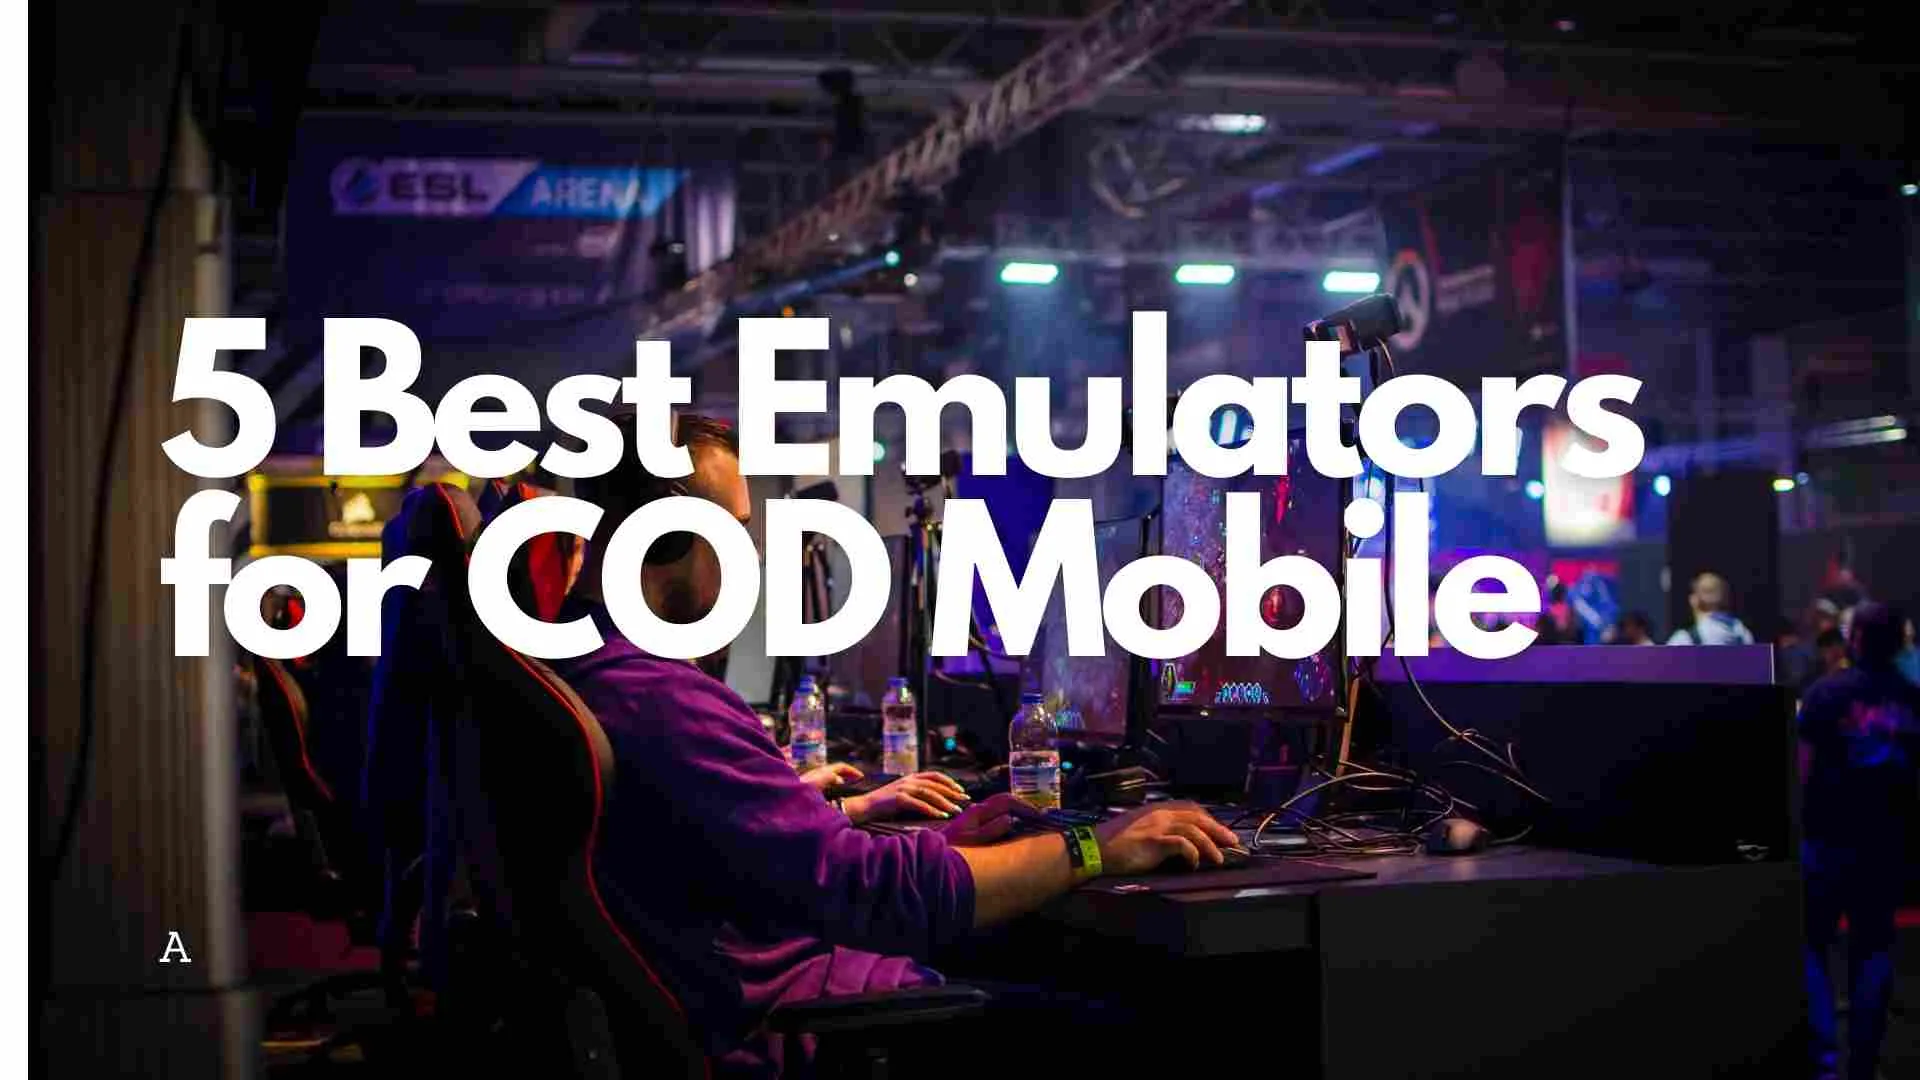 Gameloop, the Best Emulator for Playing COD Mobile, by GAMELOOP EMULATOR, The Best Emulator